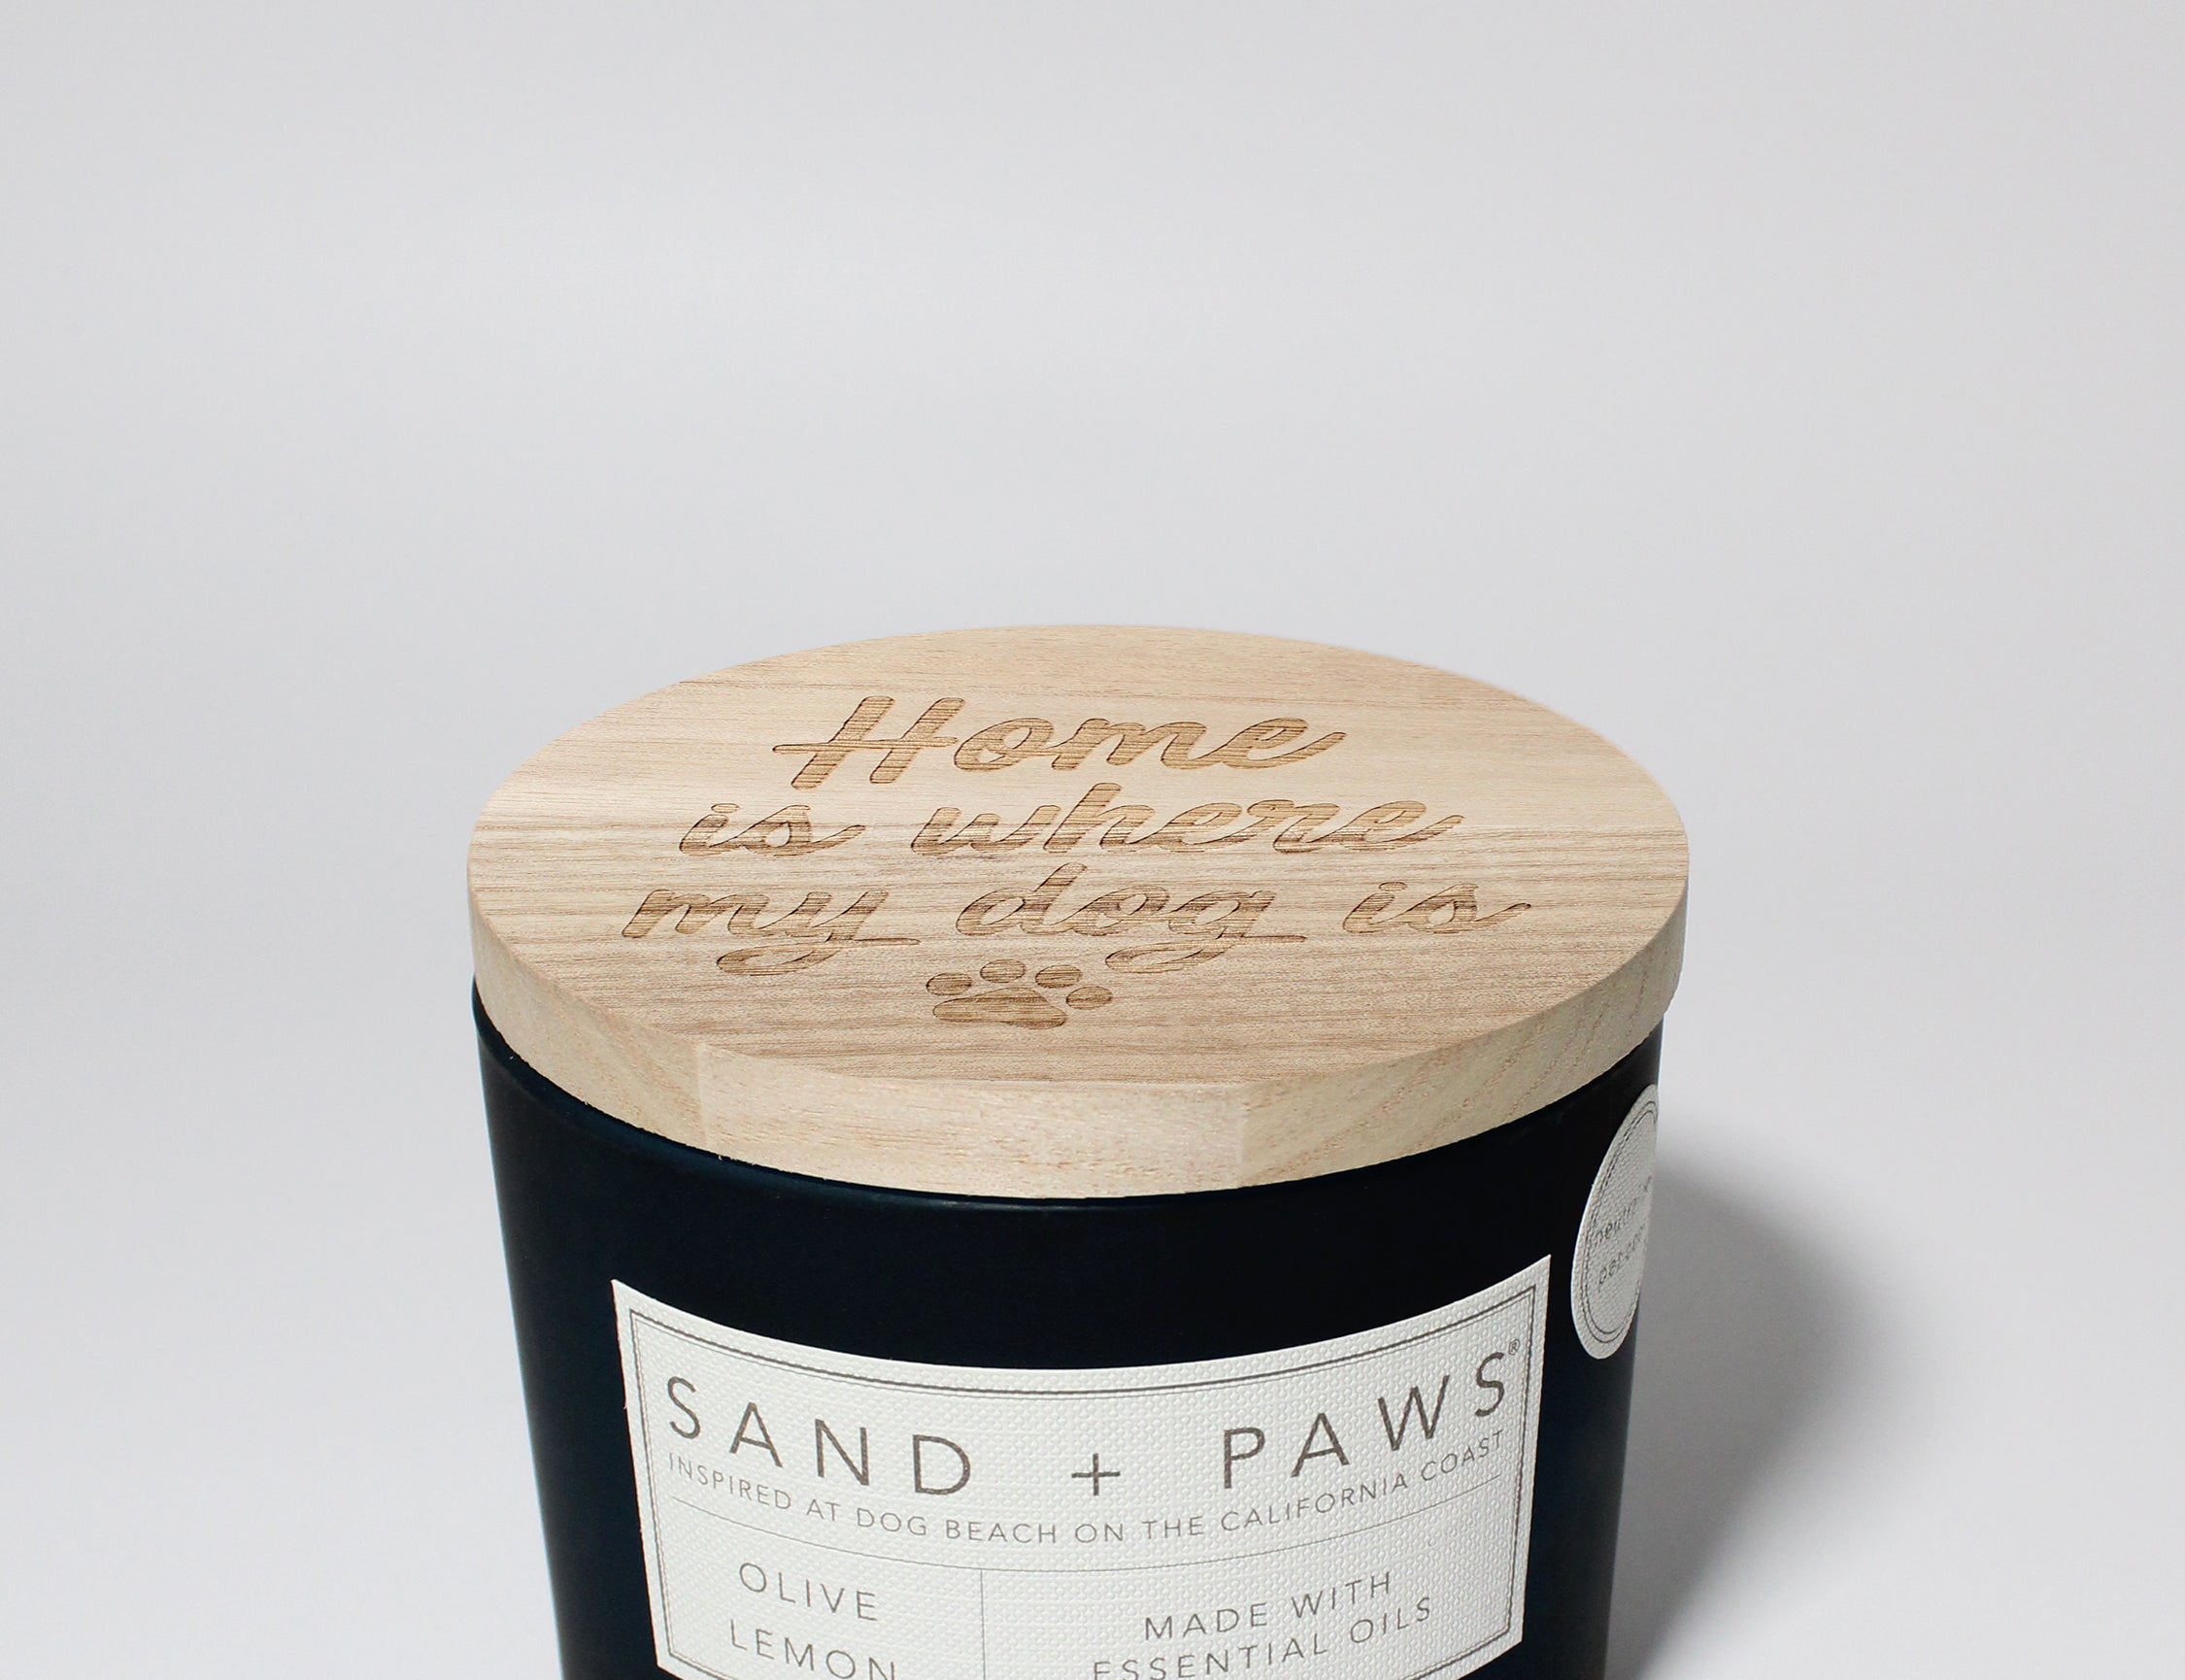 Sand + Paws Olive Lemon 12 oz scented candle Navy Vessel with Home is where my dog is lid